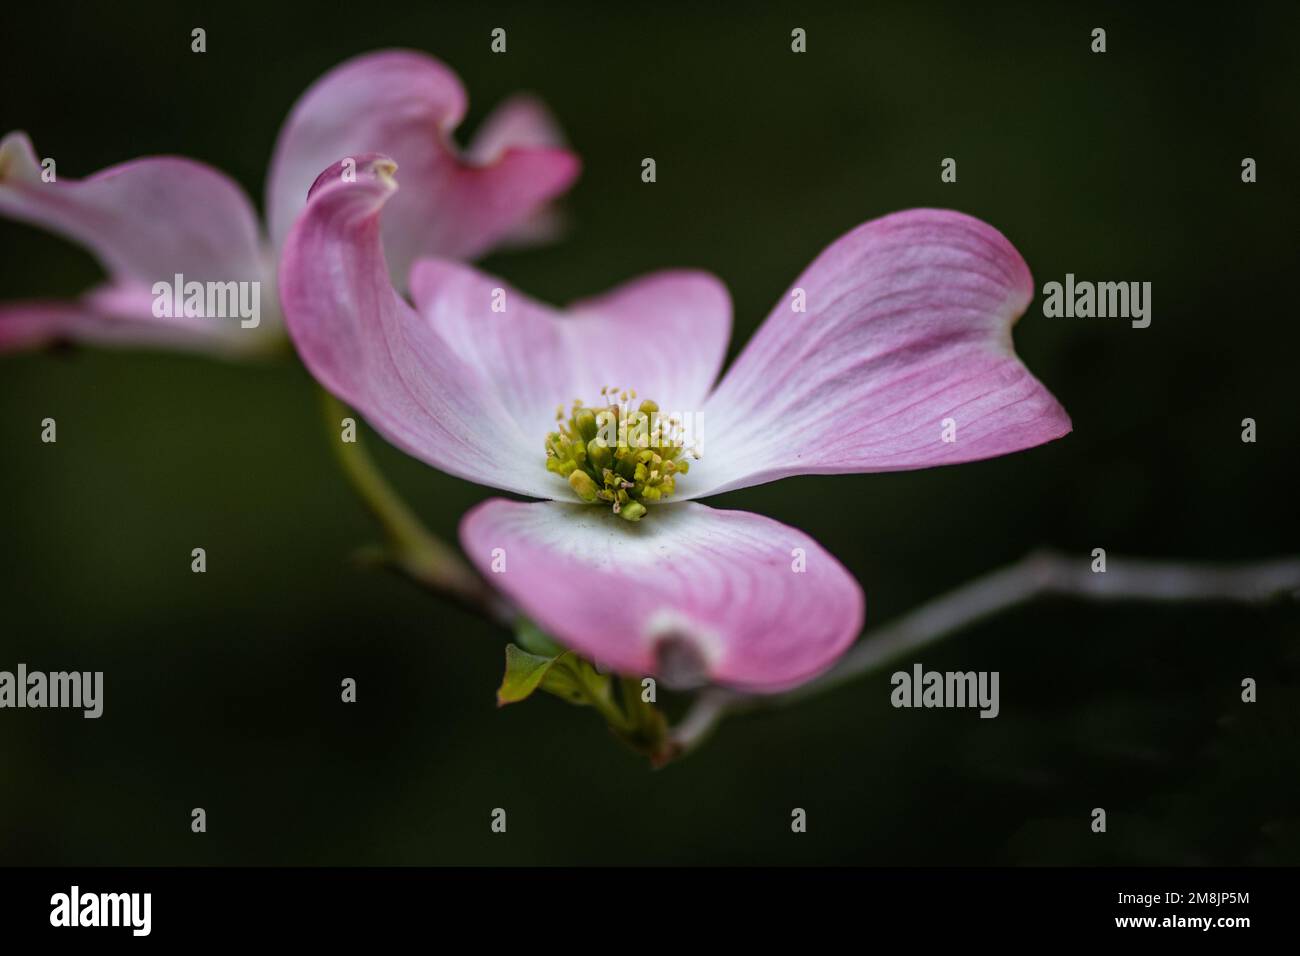 Dogwood flowers, pink. Spring concept against green bokeh background, viewed from the side, selective focus, highlighting the center and petals Stock Photo